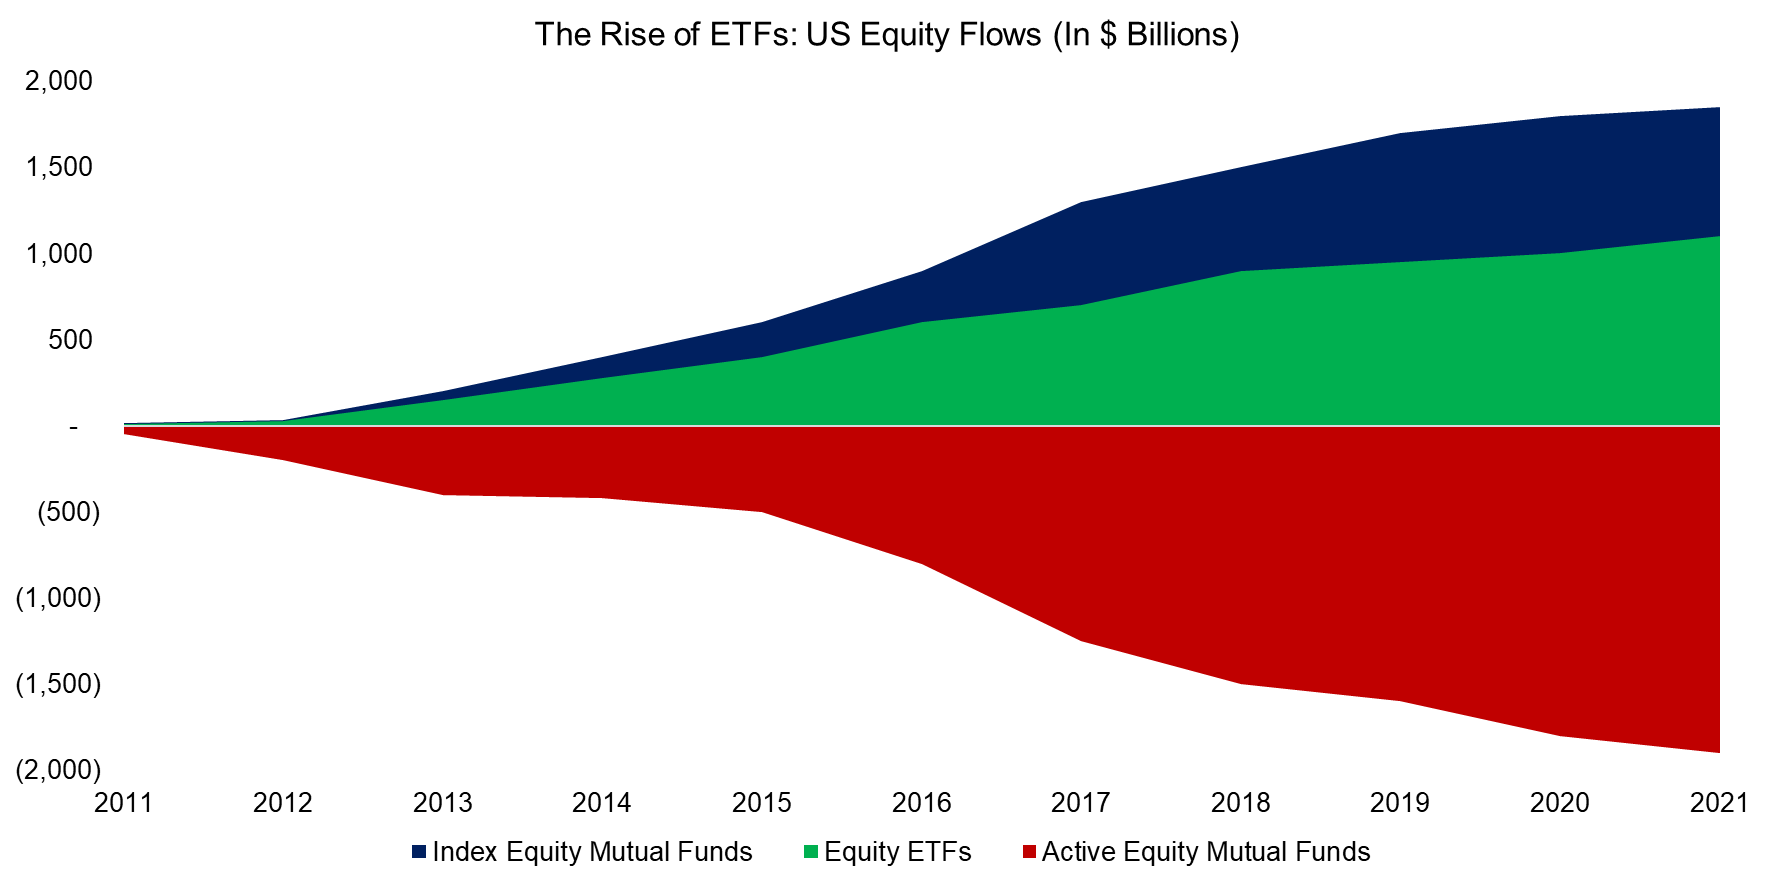 The Rise of ETFs US Equity Flows (In $ Billions)